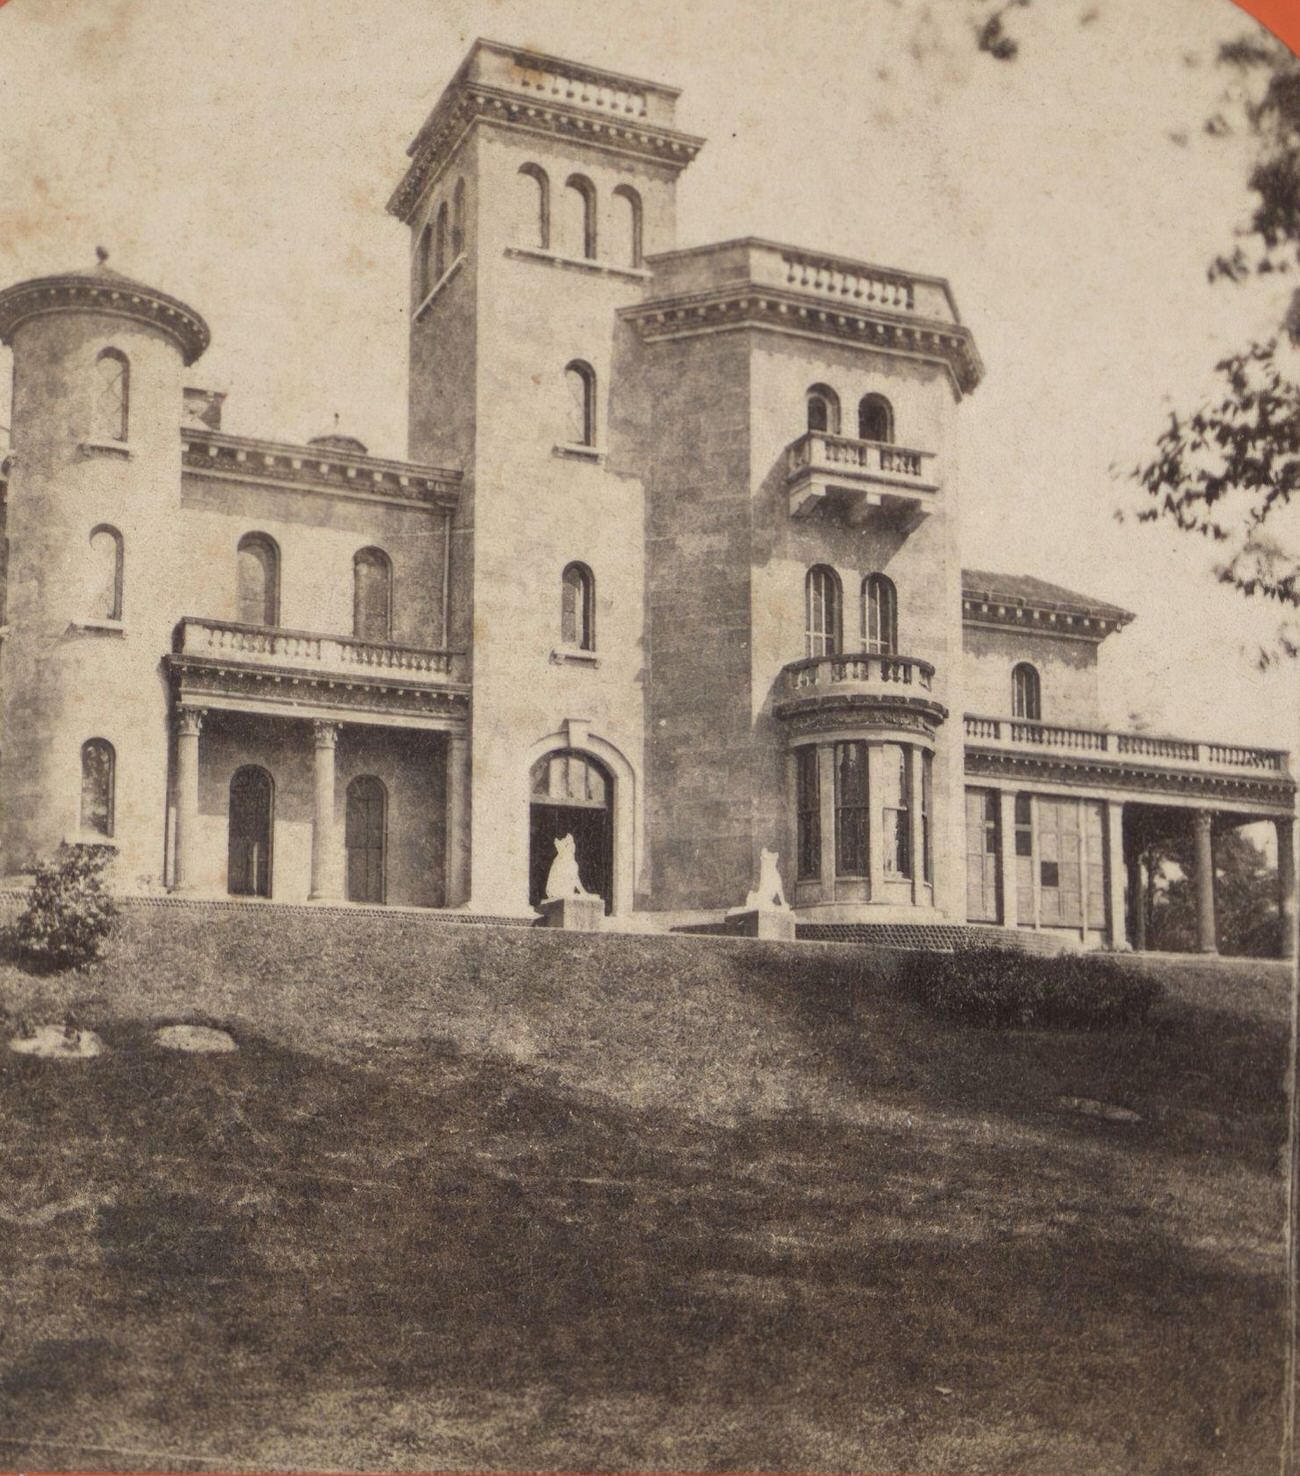 Litchfield Mansion In Prospect Park, Brooklyn, 1860S